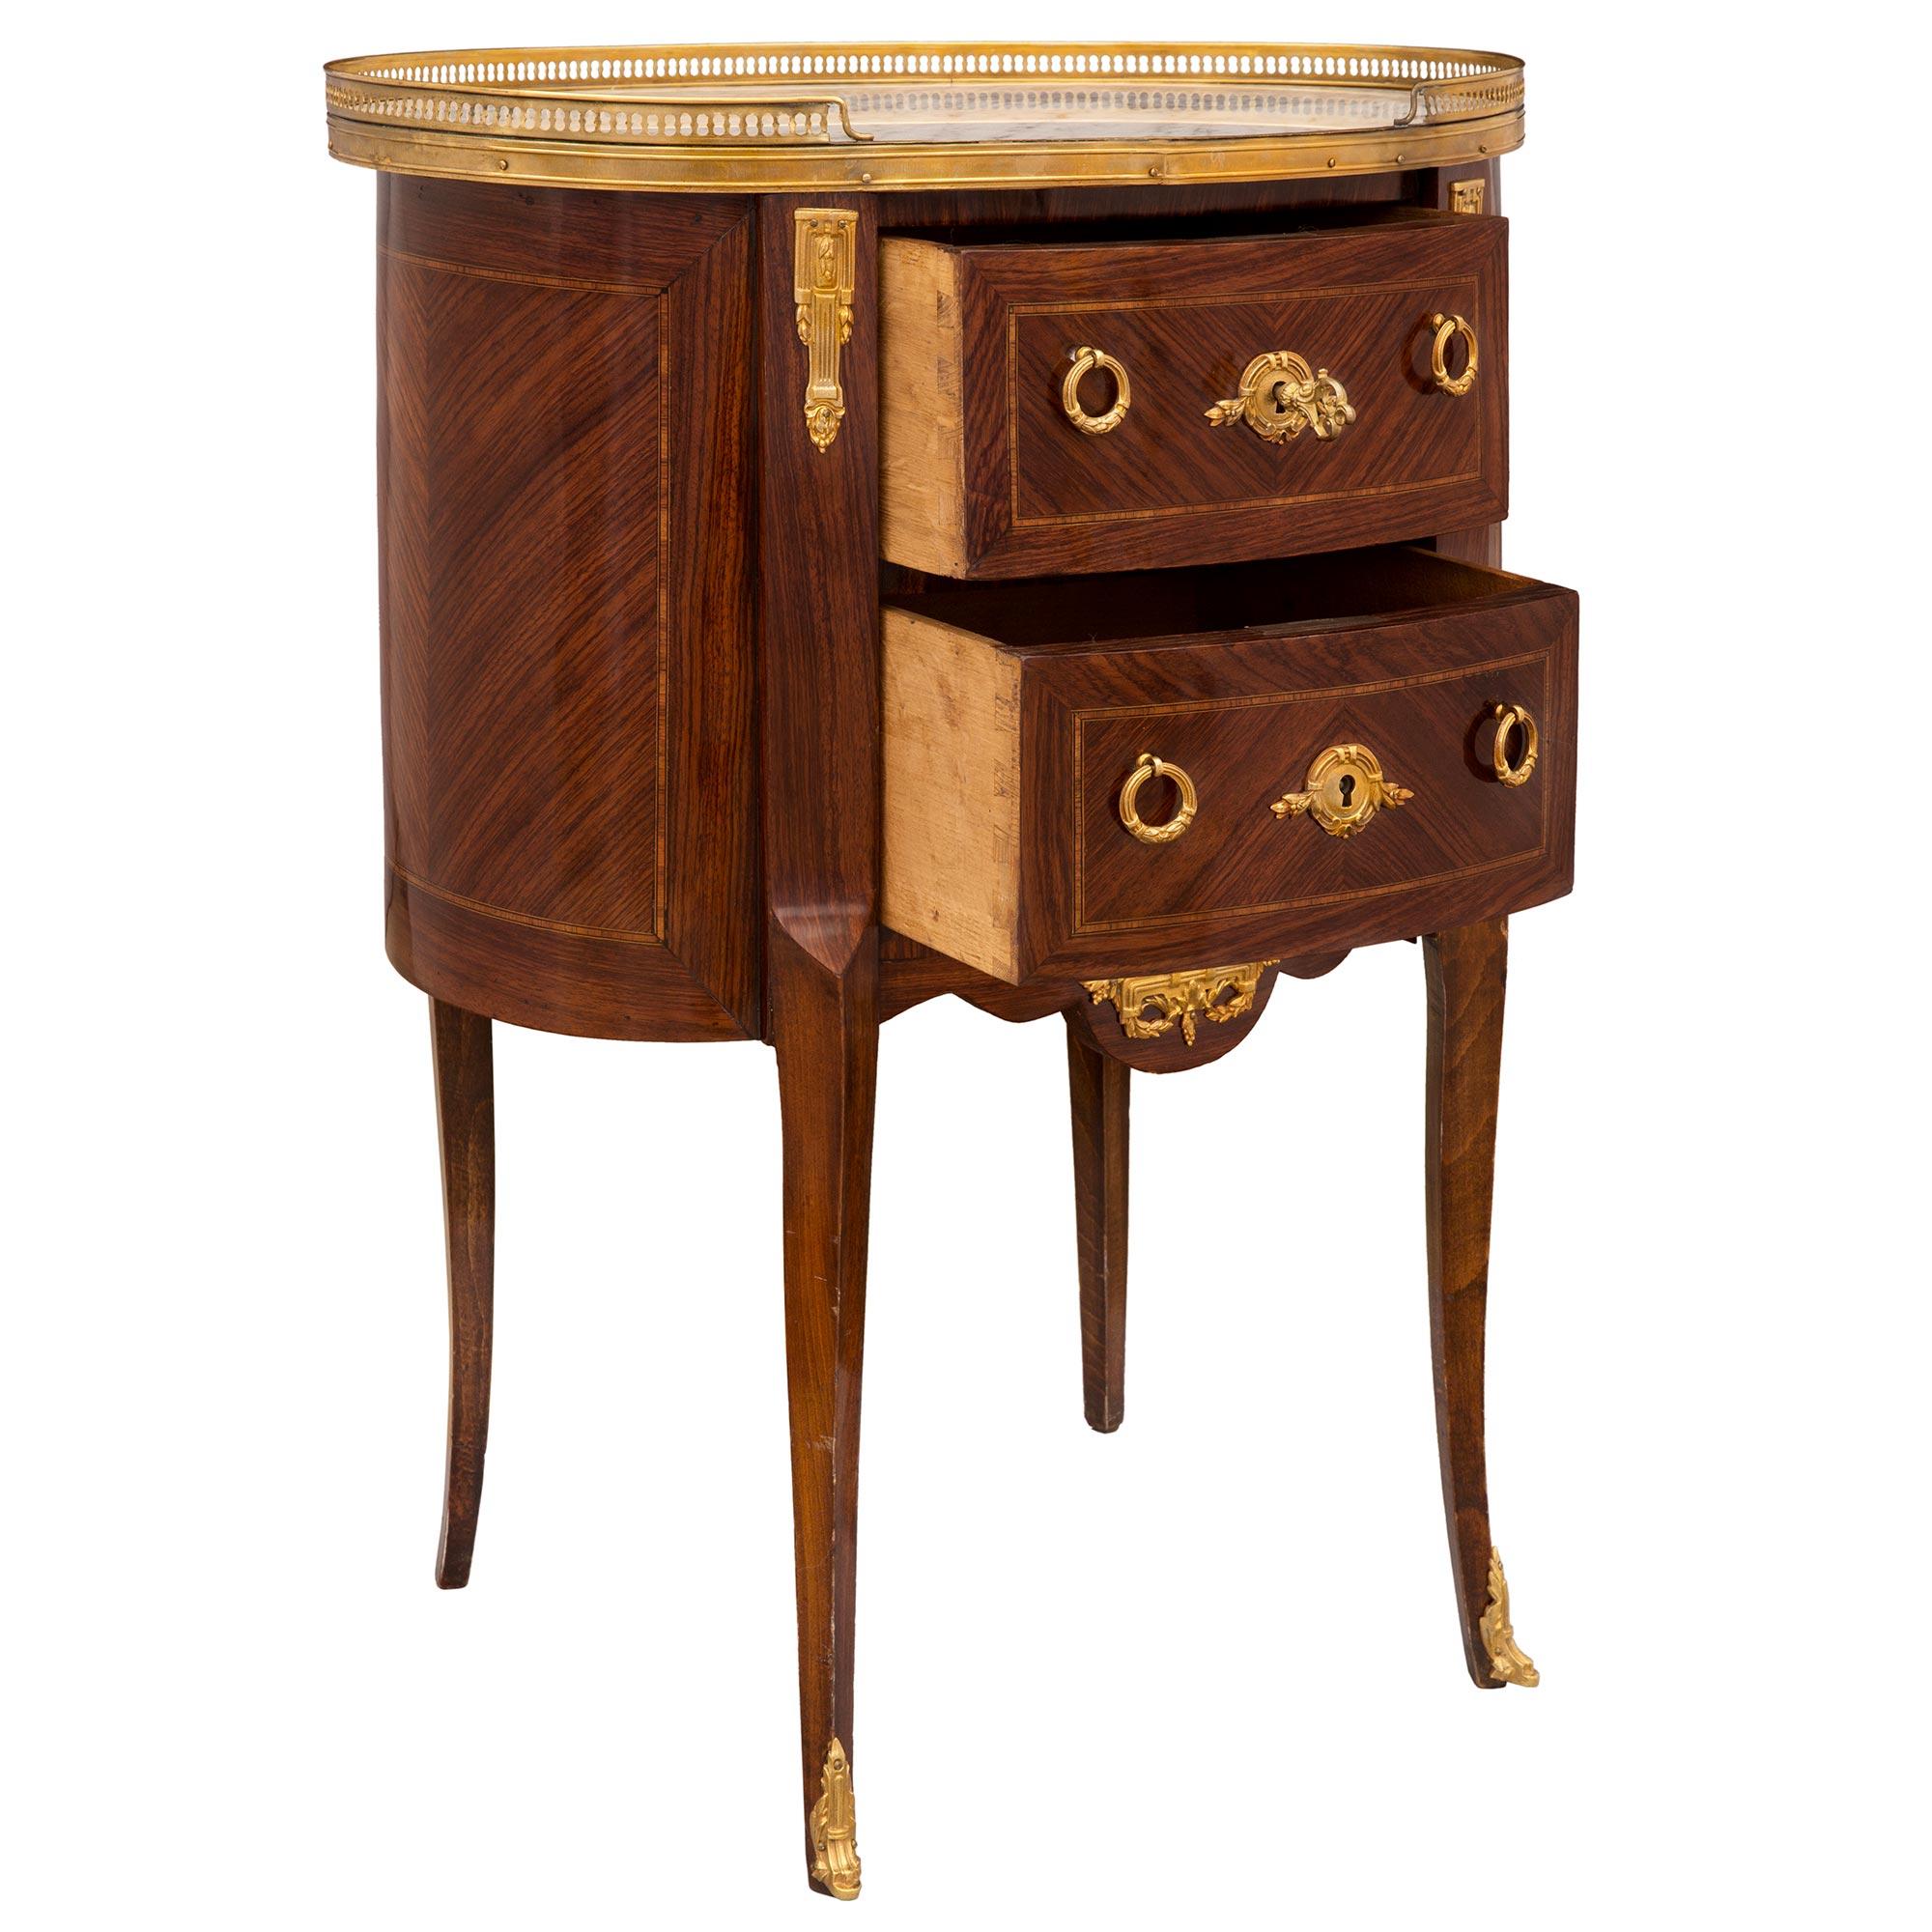 French 19th Century Transitional Style Kingwood, Boxwood and Ormolu Side Table For Sale 1